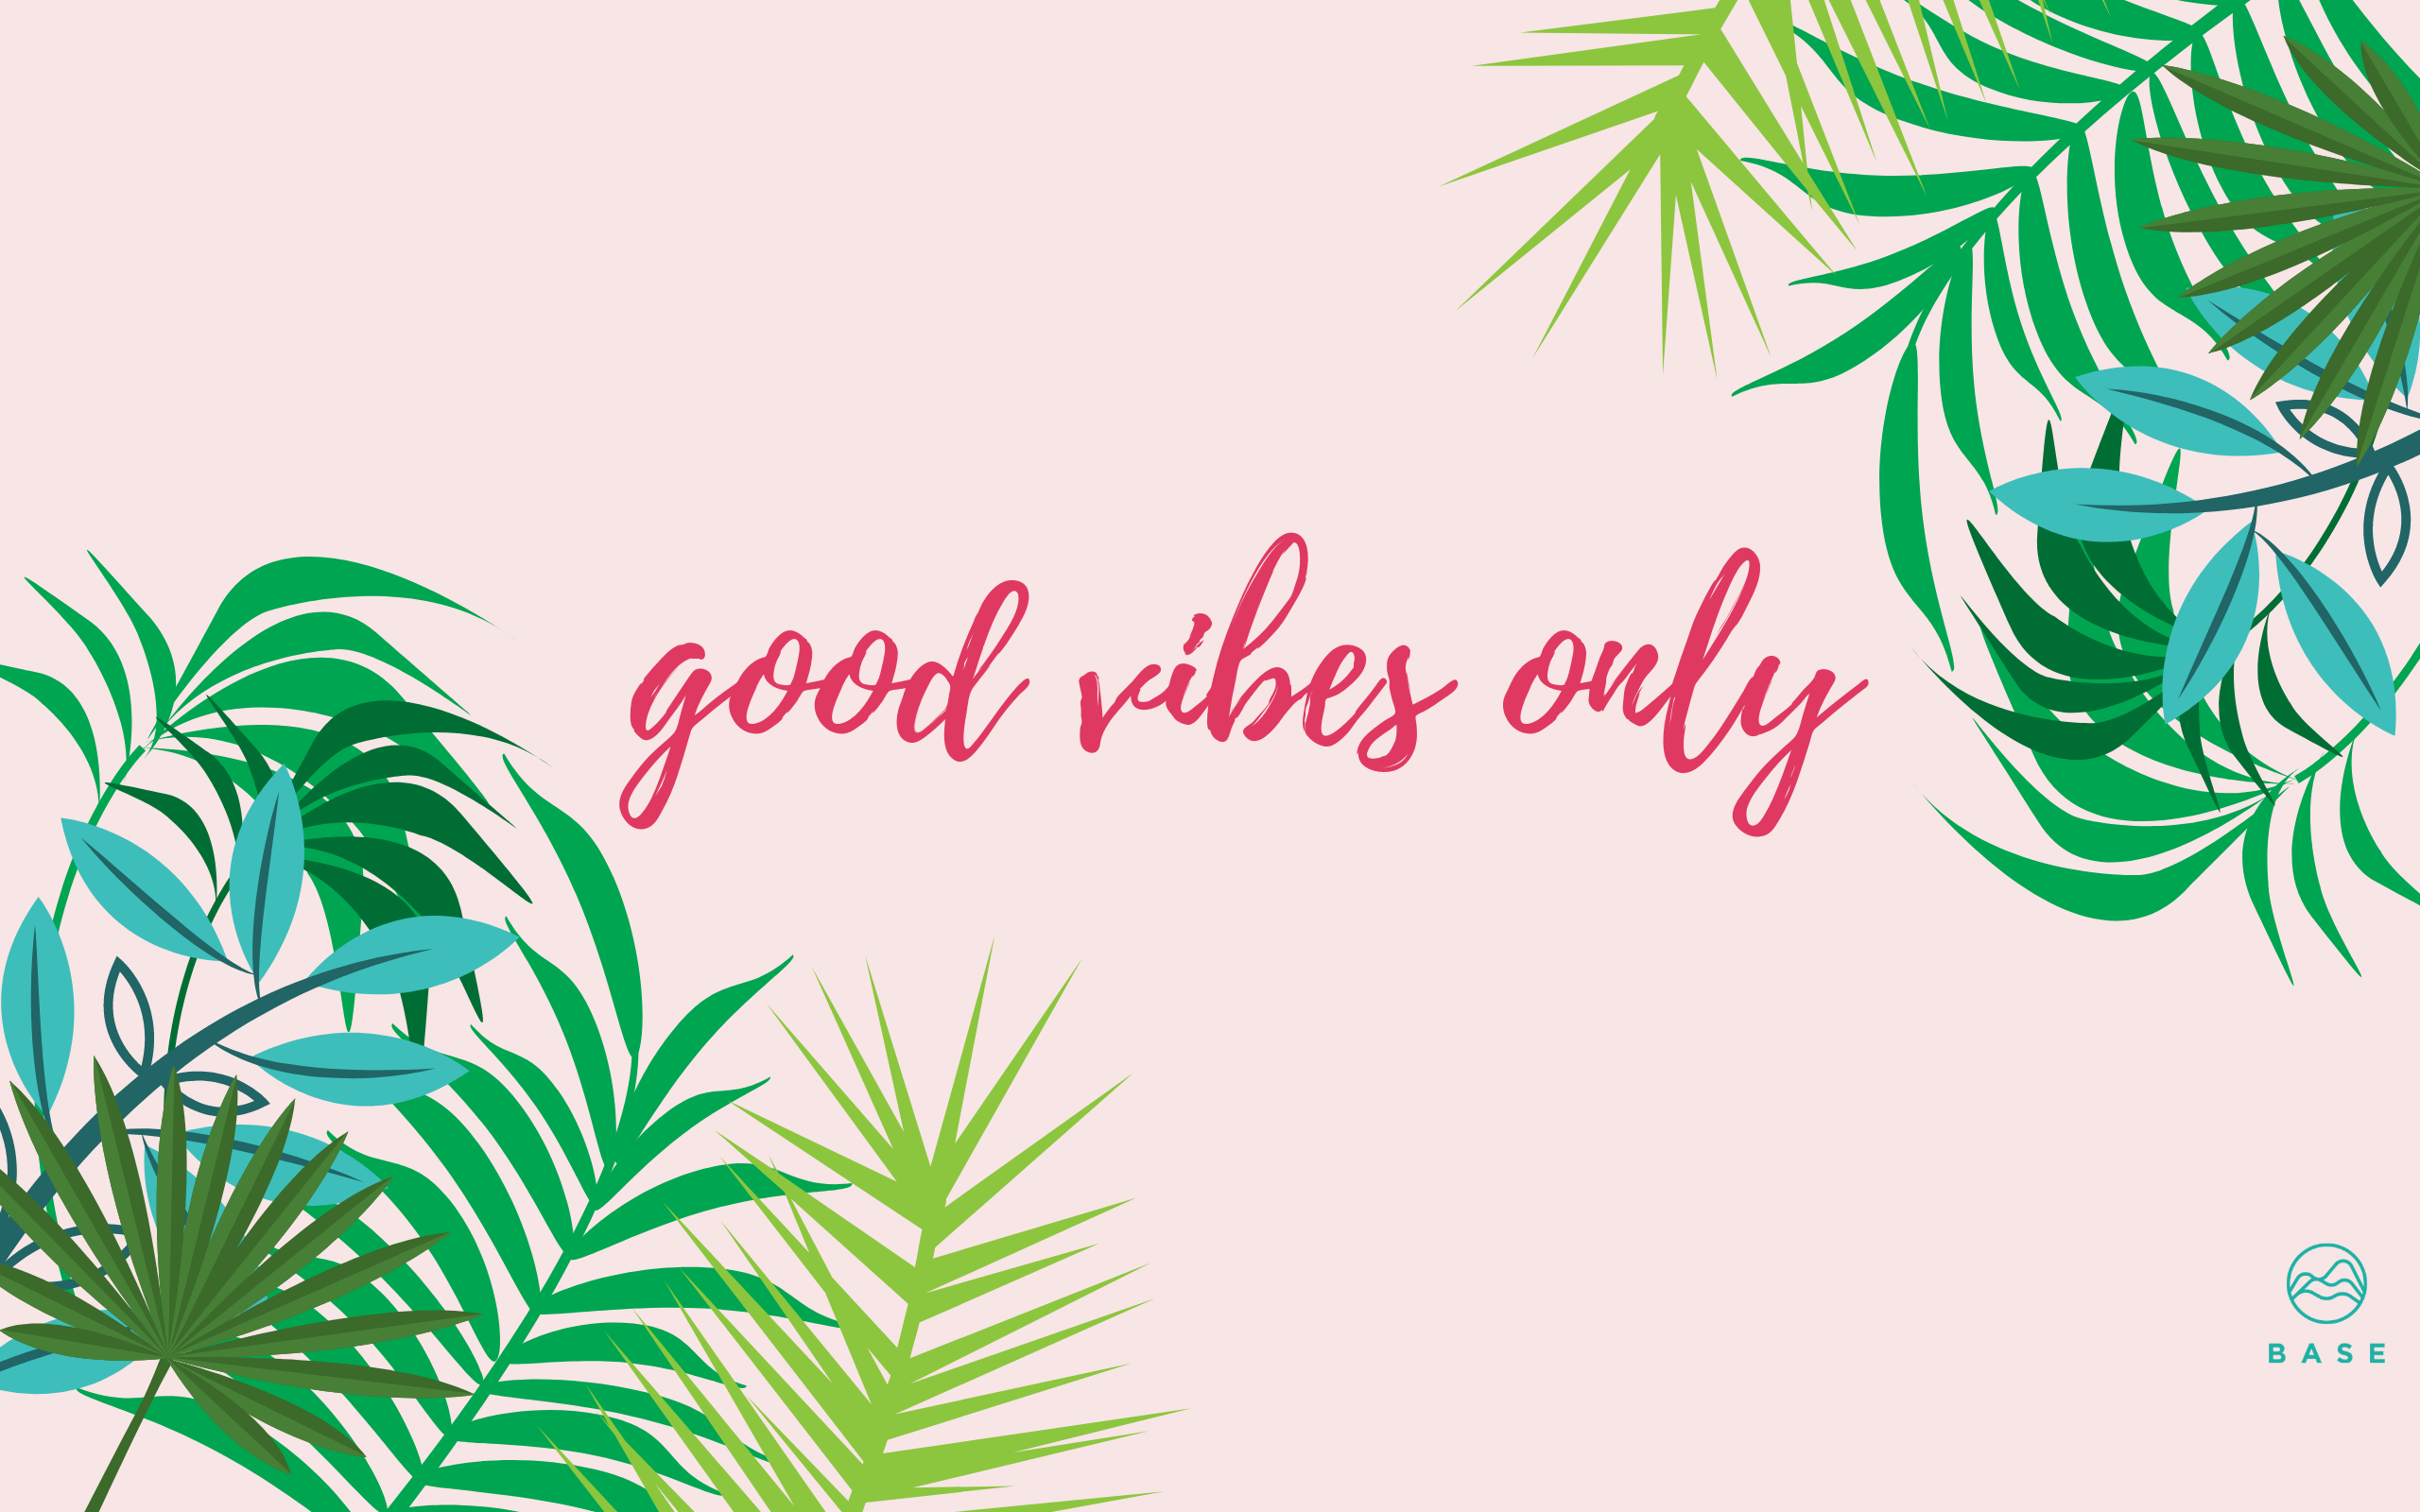 Positive Vibes Wallpaper, HD Positive Vibes Background on WallpaperBat